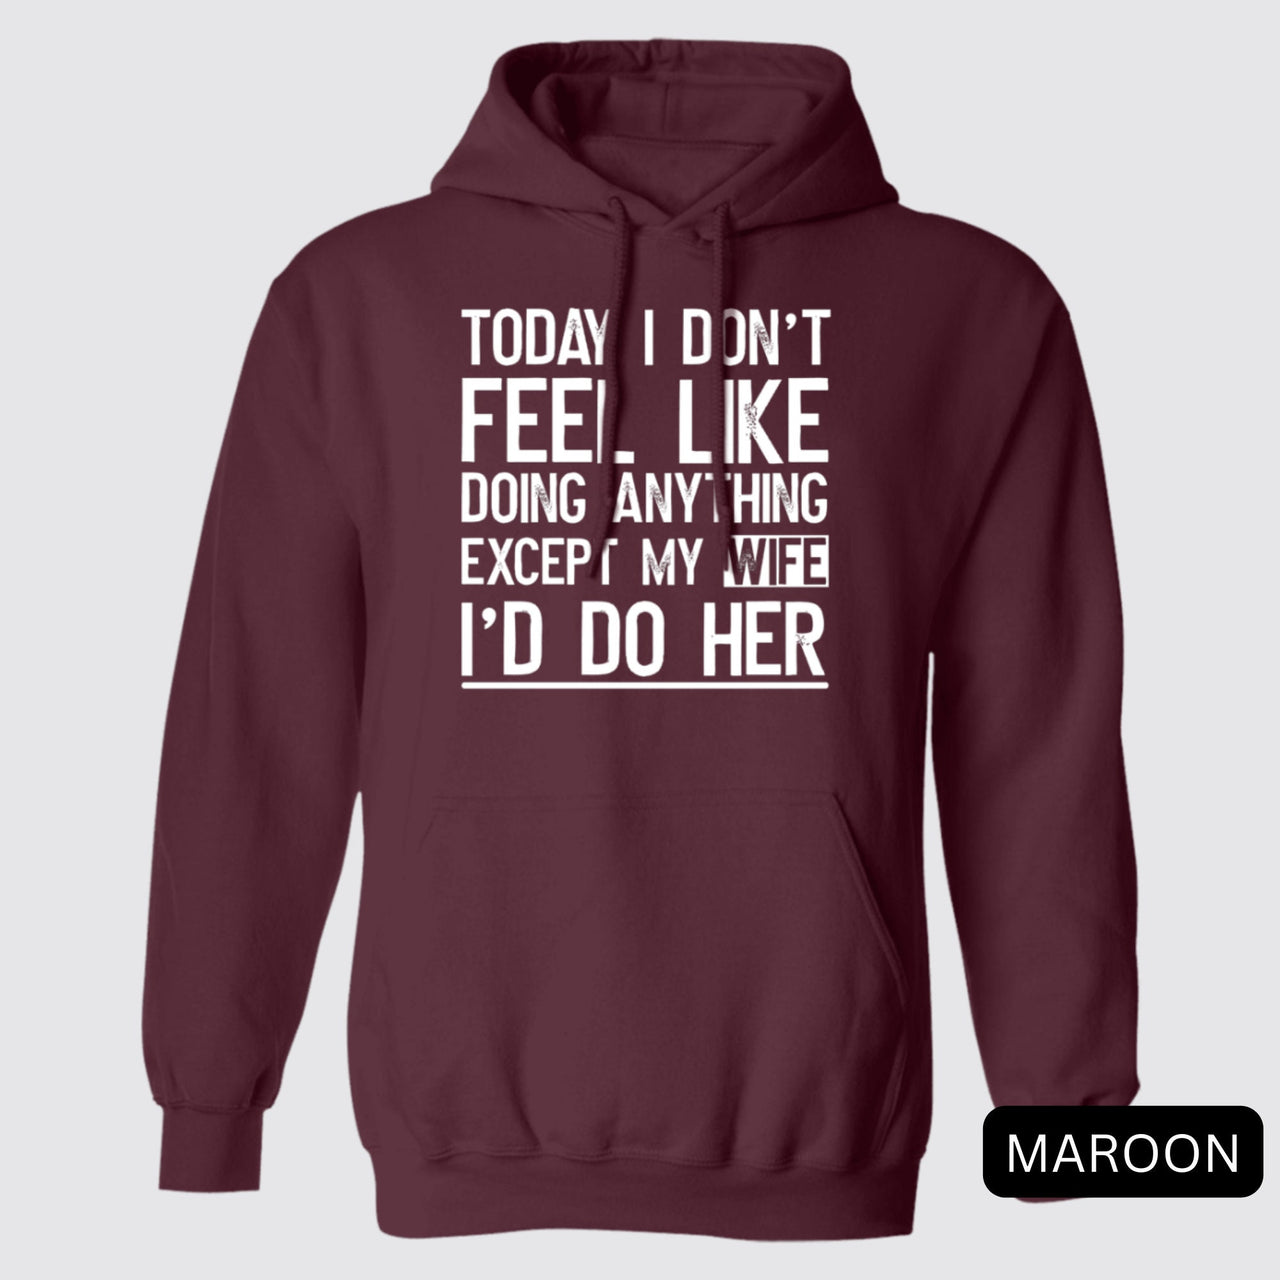 Today I Don't Feel Like Doing Anything Except My Wife I'd Do Her Hoodies